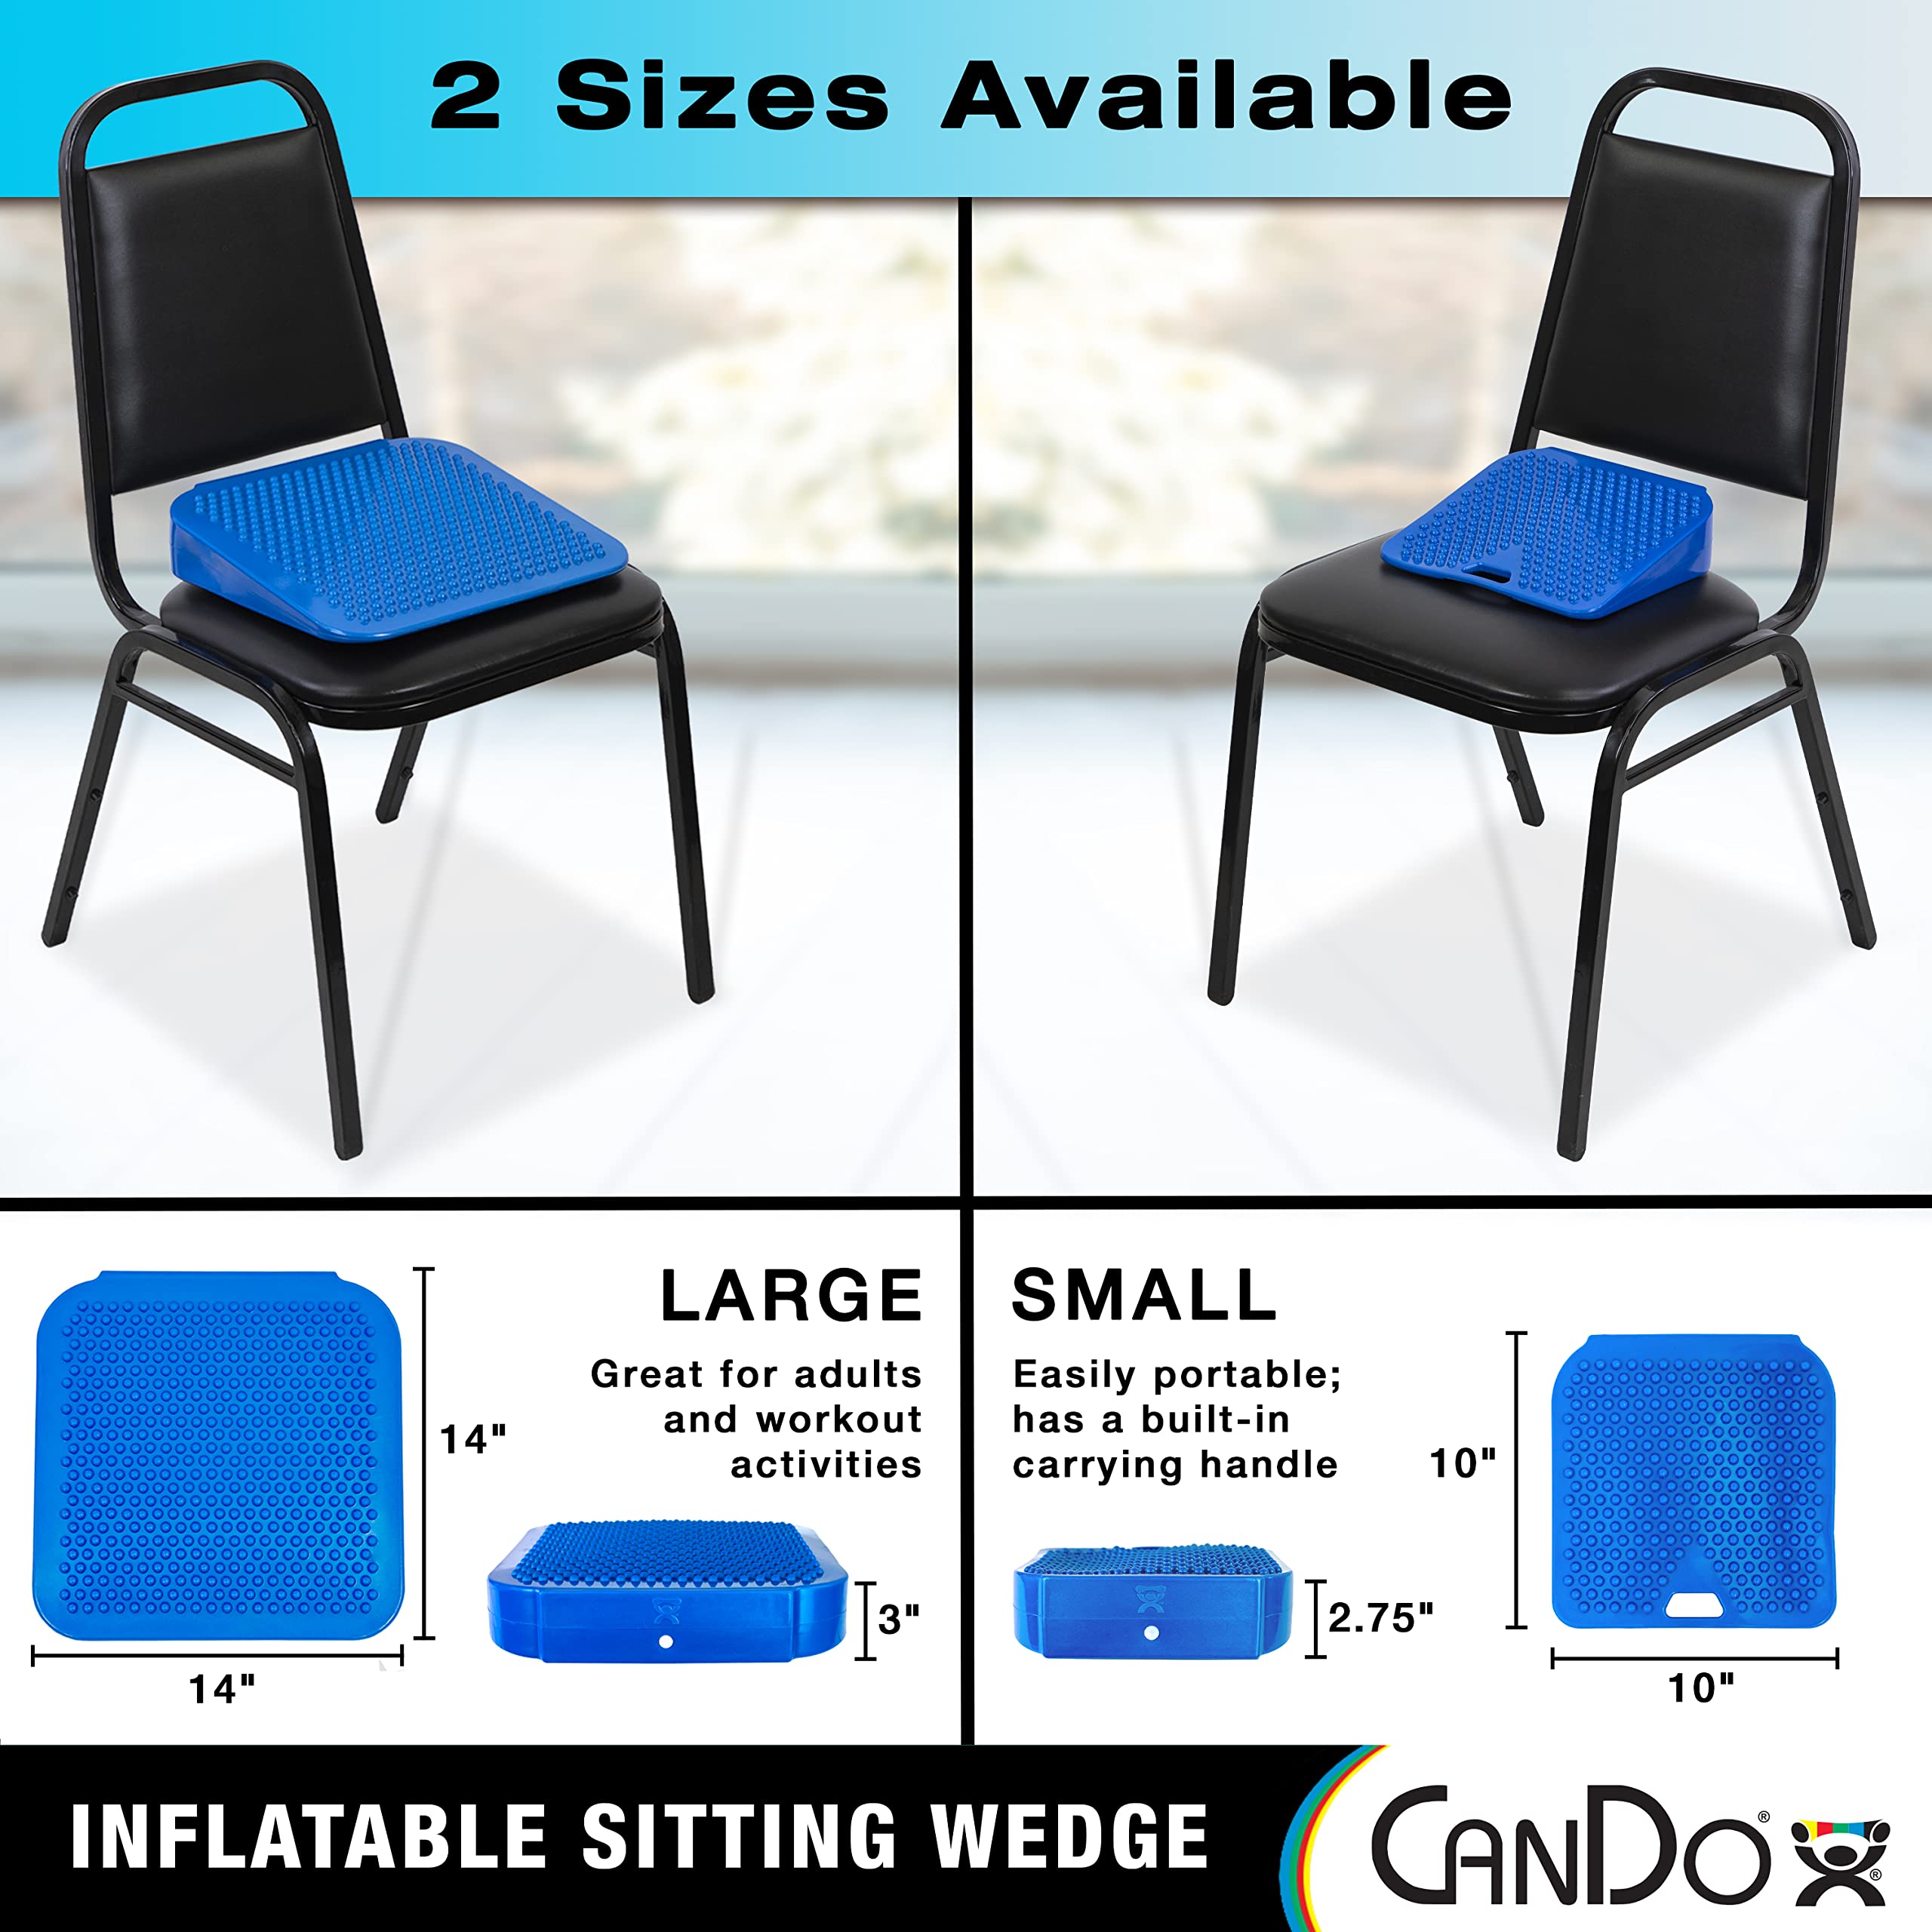 CanDo Sitting Wedge Active Seat Wobble Cushion for Posture, Back Pain, Stress Relief, Restlessness, and Anxiety - Child Size, 10